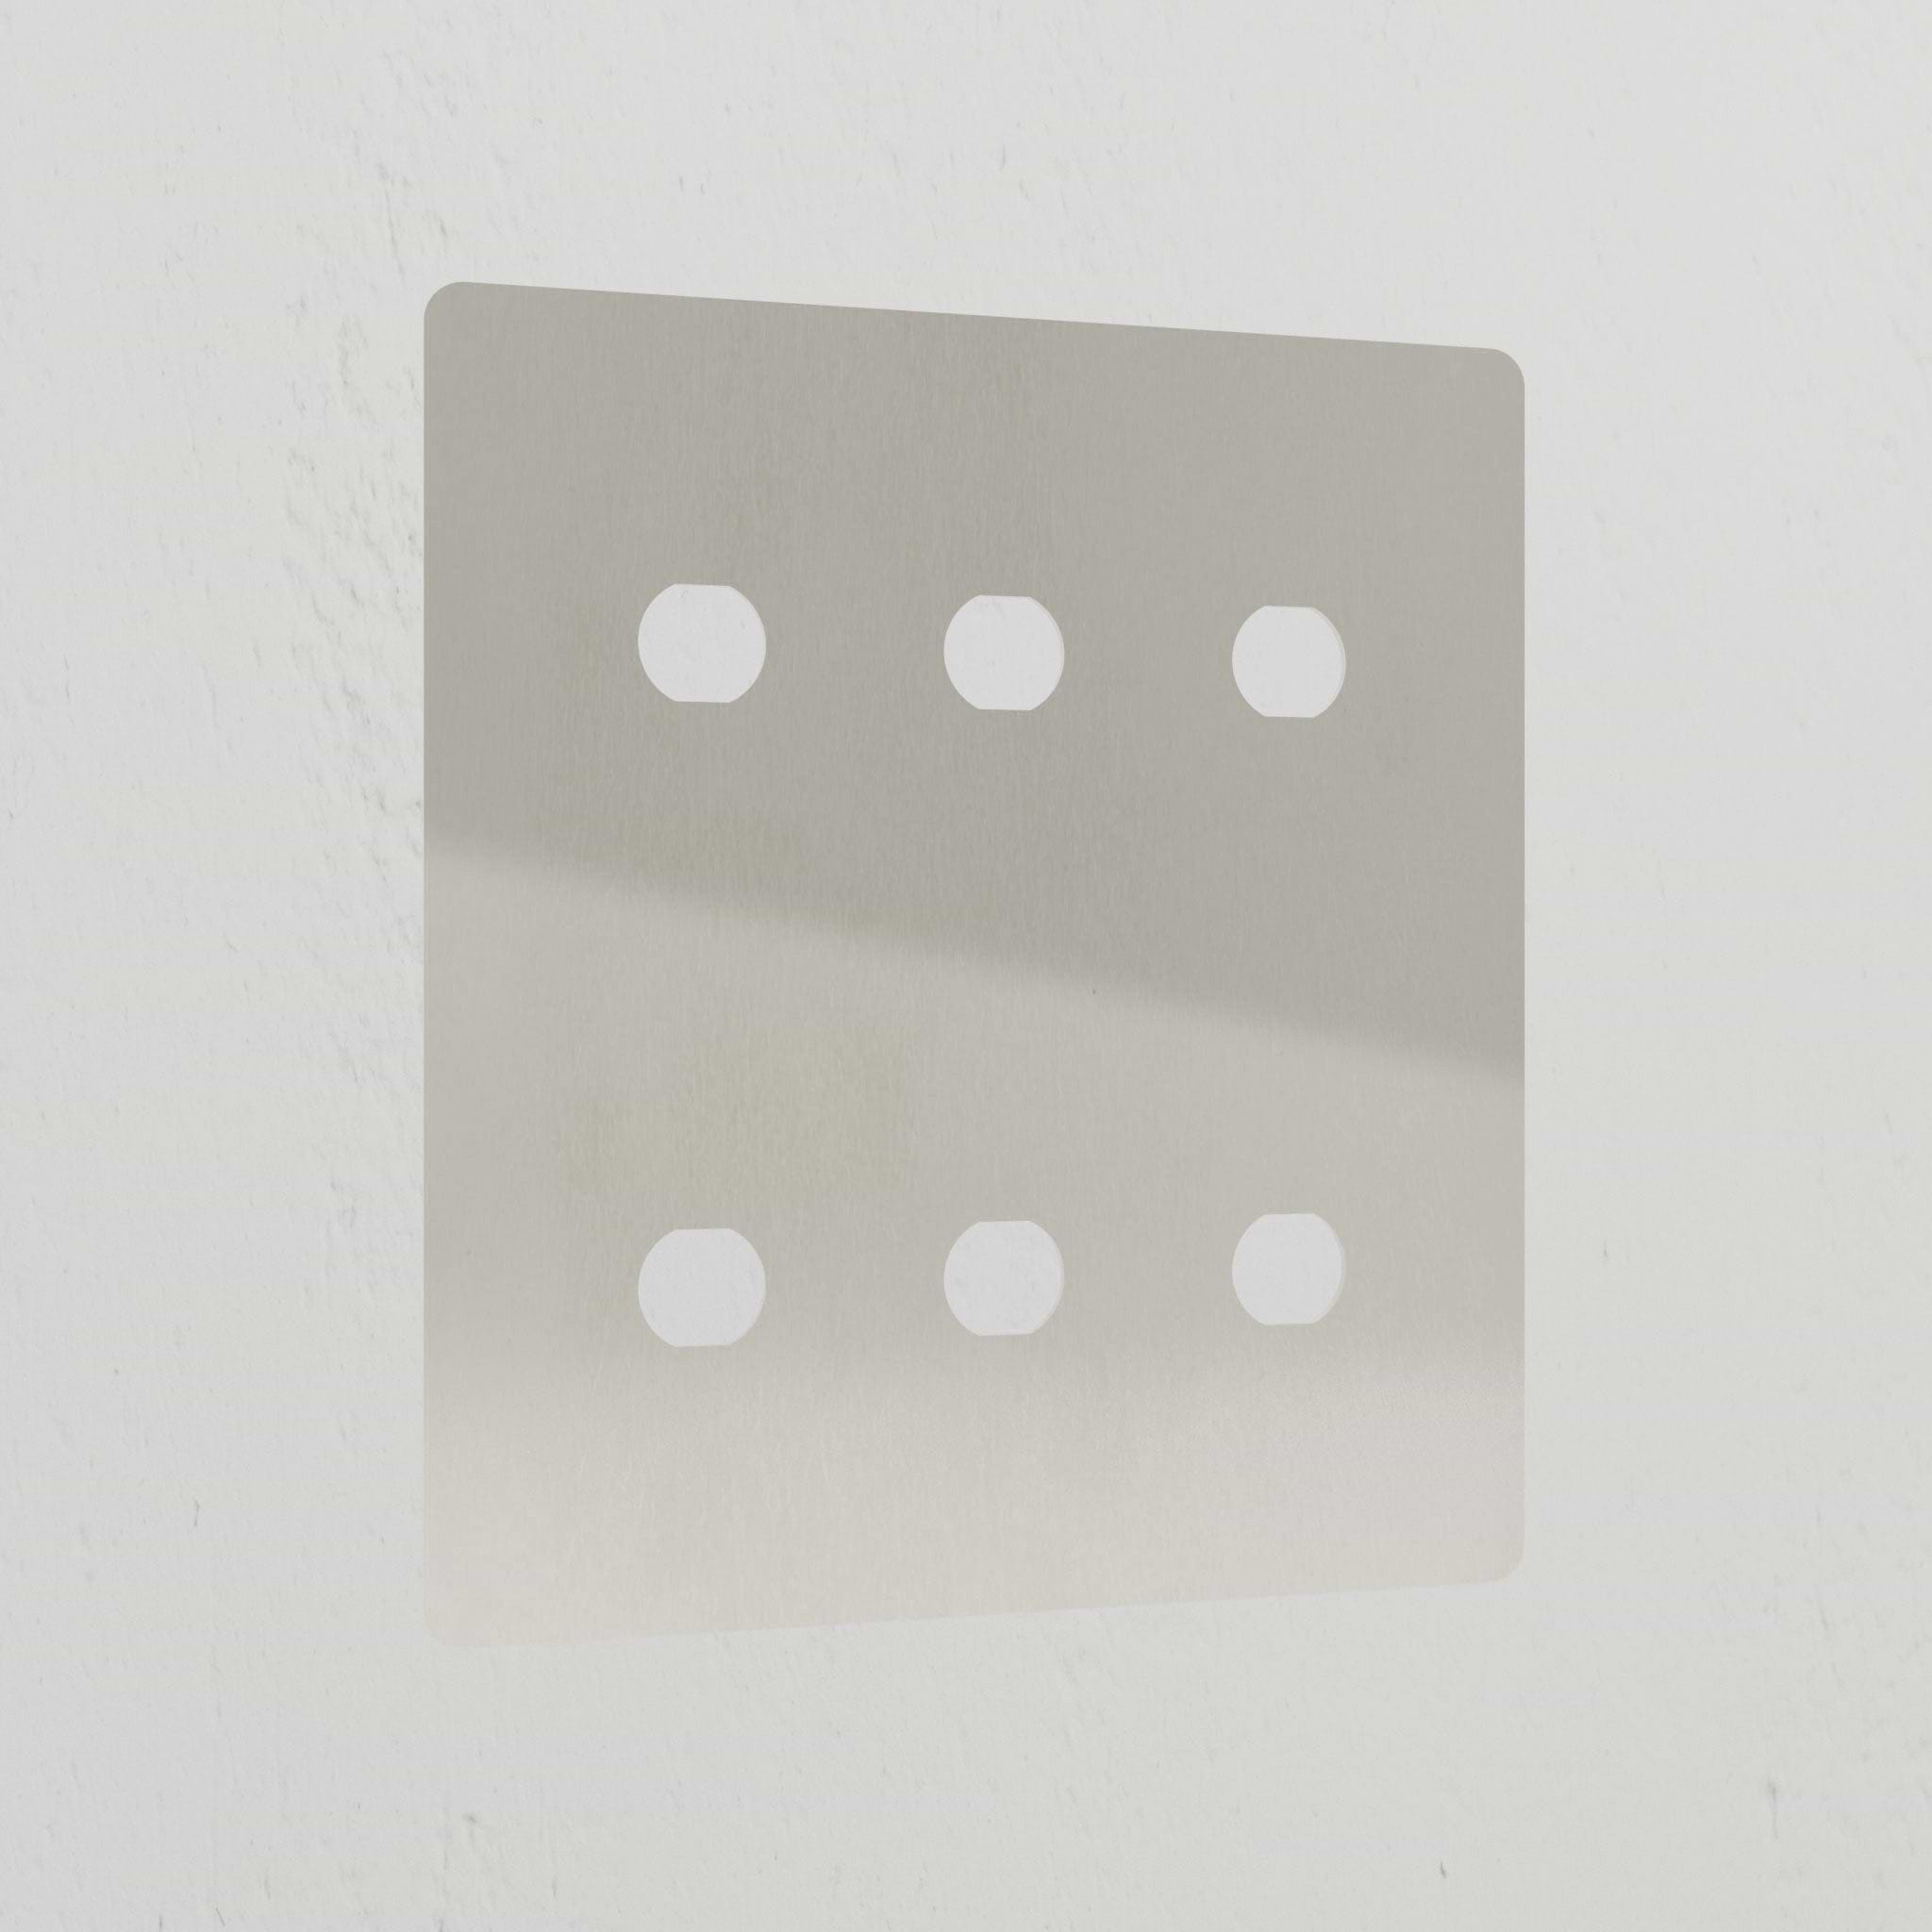 6G Switch Plate - Polished Nickel